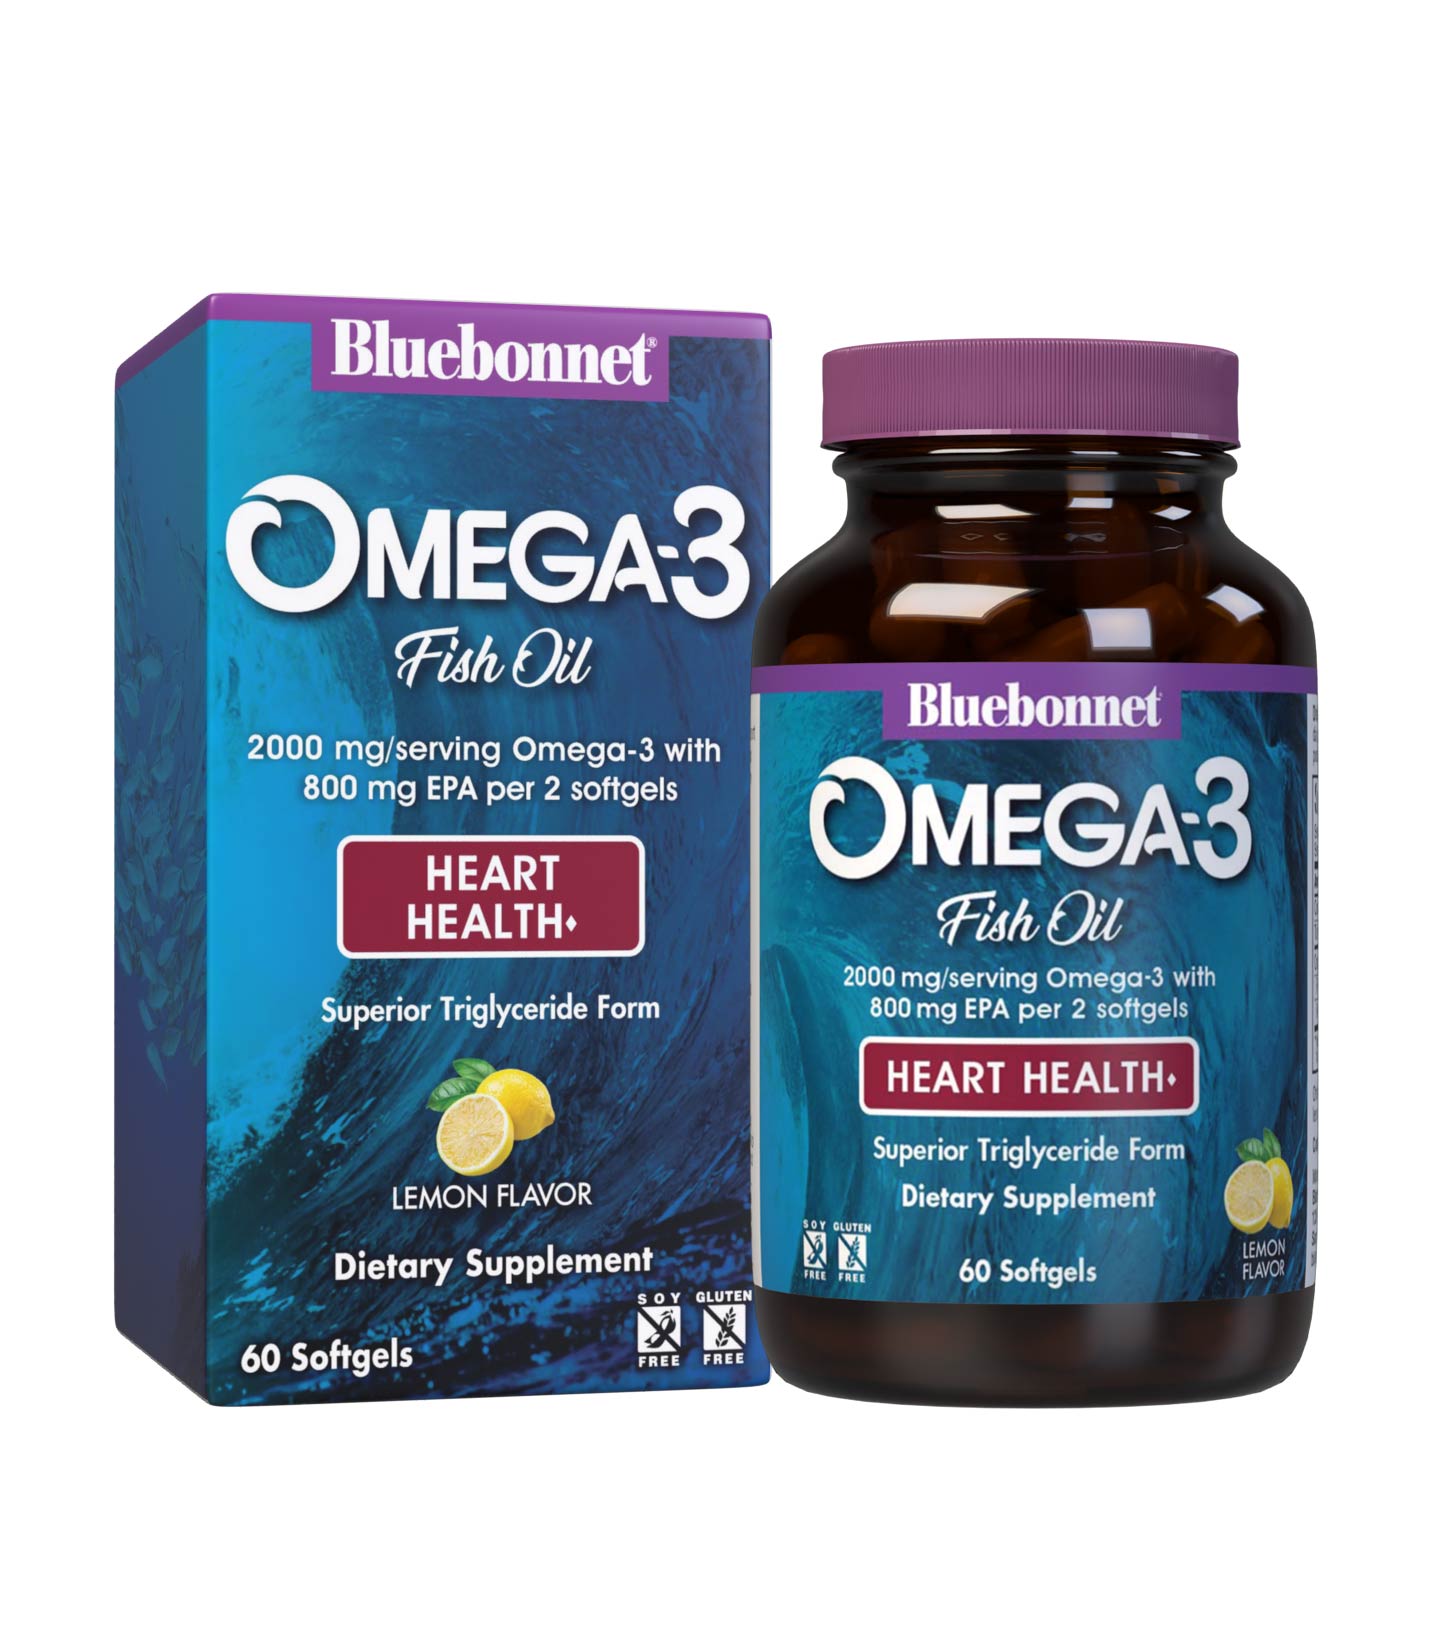 Bluebonnet’s Omega-3 Fish Oil Heart Health 60 Softgels are formulated with a specific ratio of EPA and DHA to help support heart function, blood flow, and blood pressure within the normal range by utilizing ultra-refined omega-3s from wild-caught fish. Box with bottle image. #size_60 count